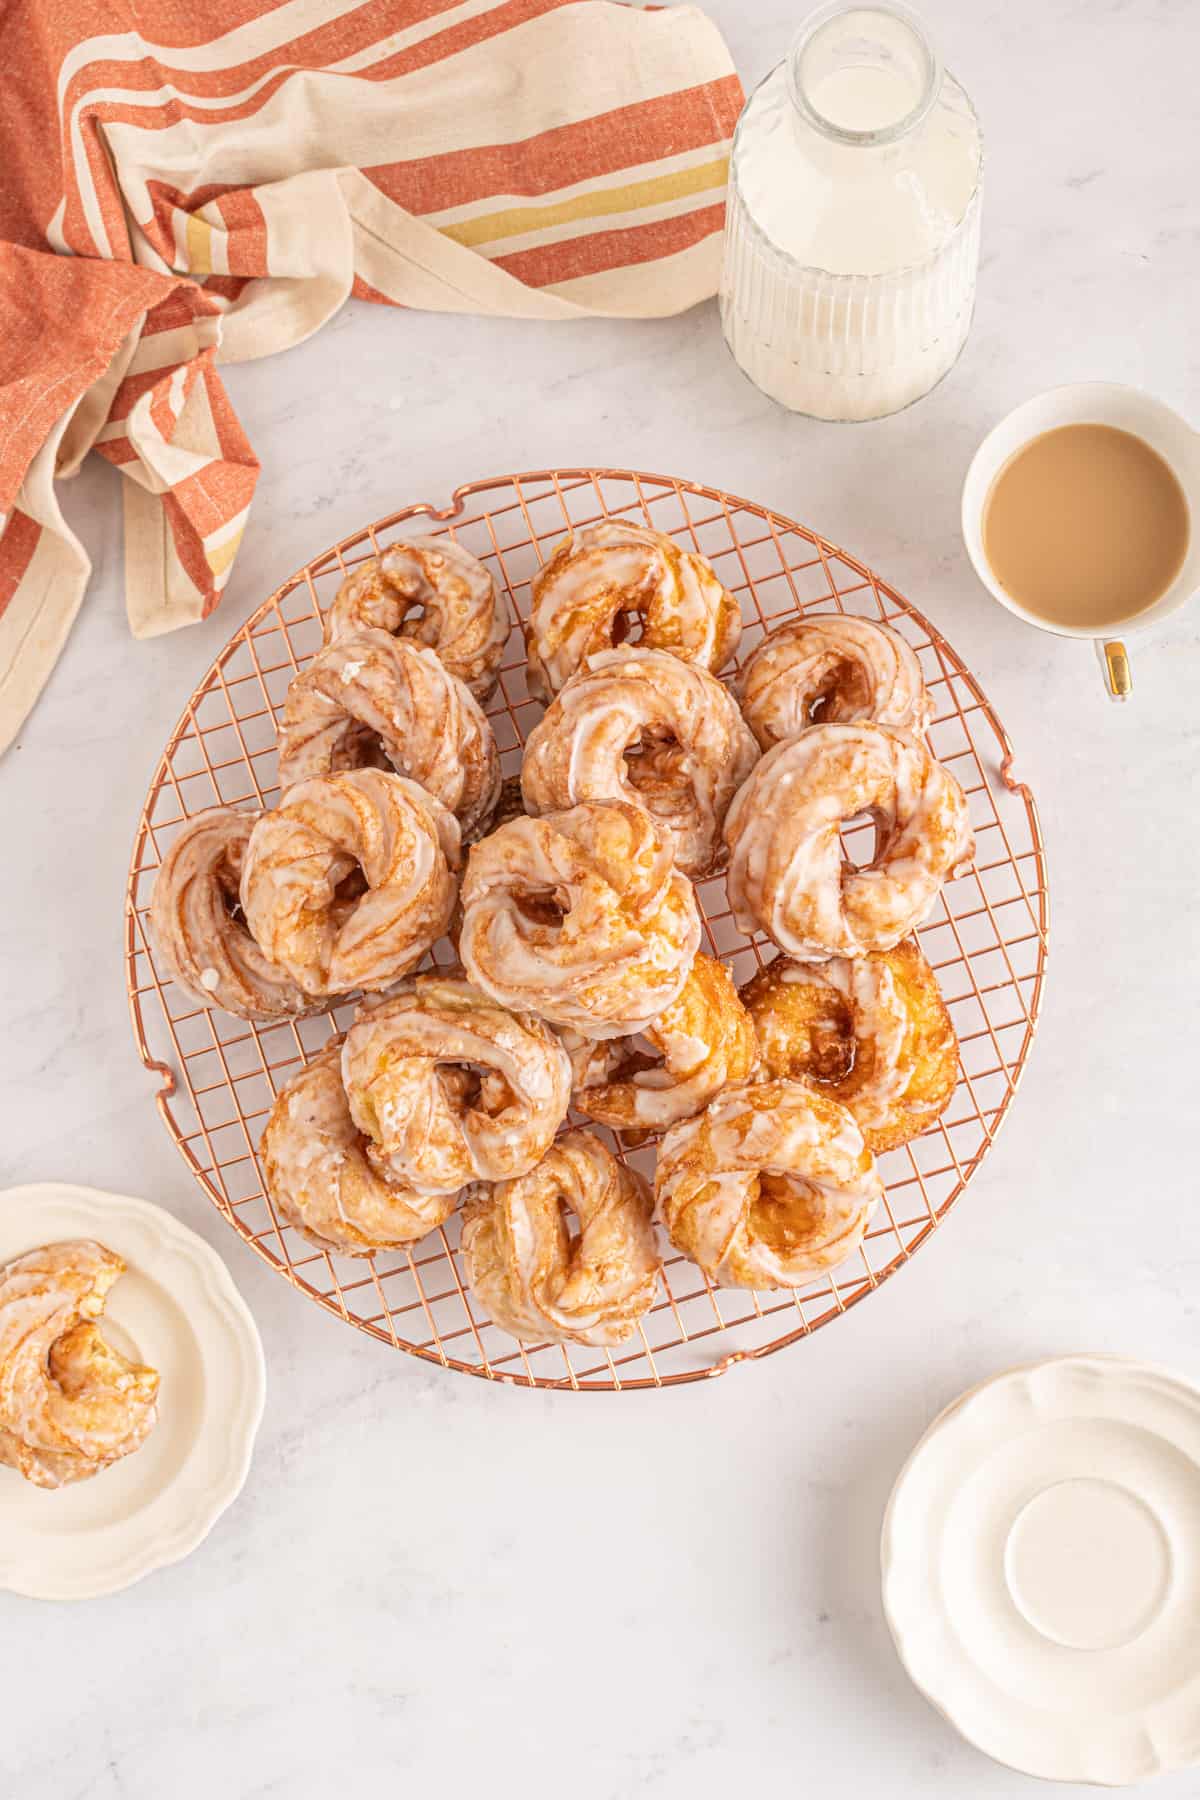 homemade French crullers